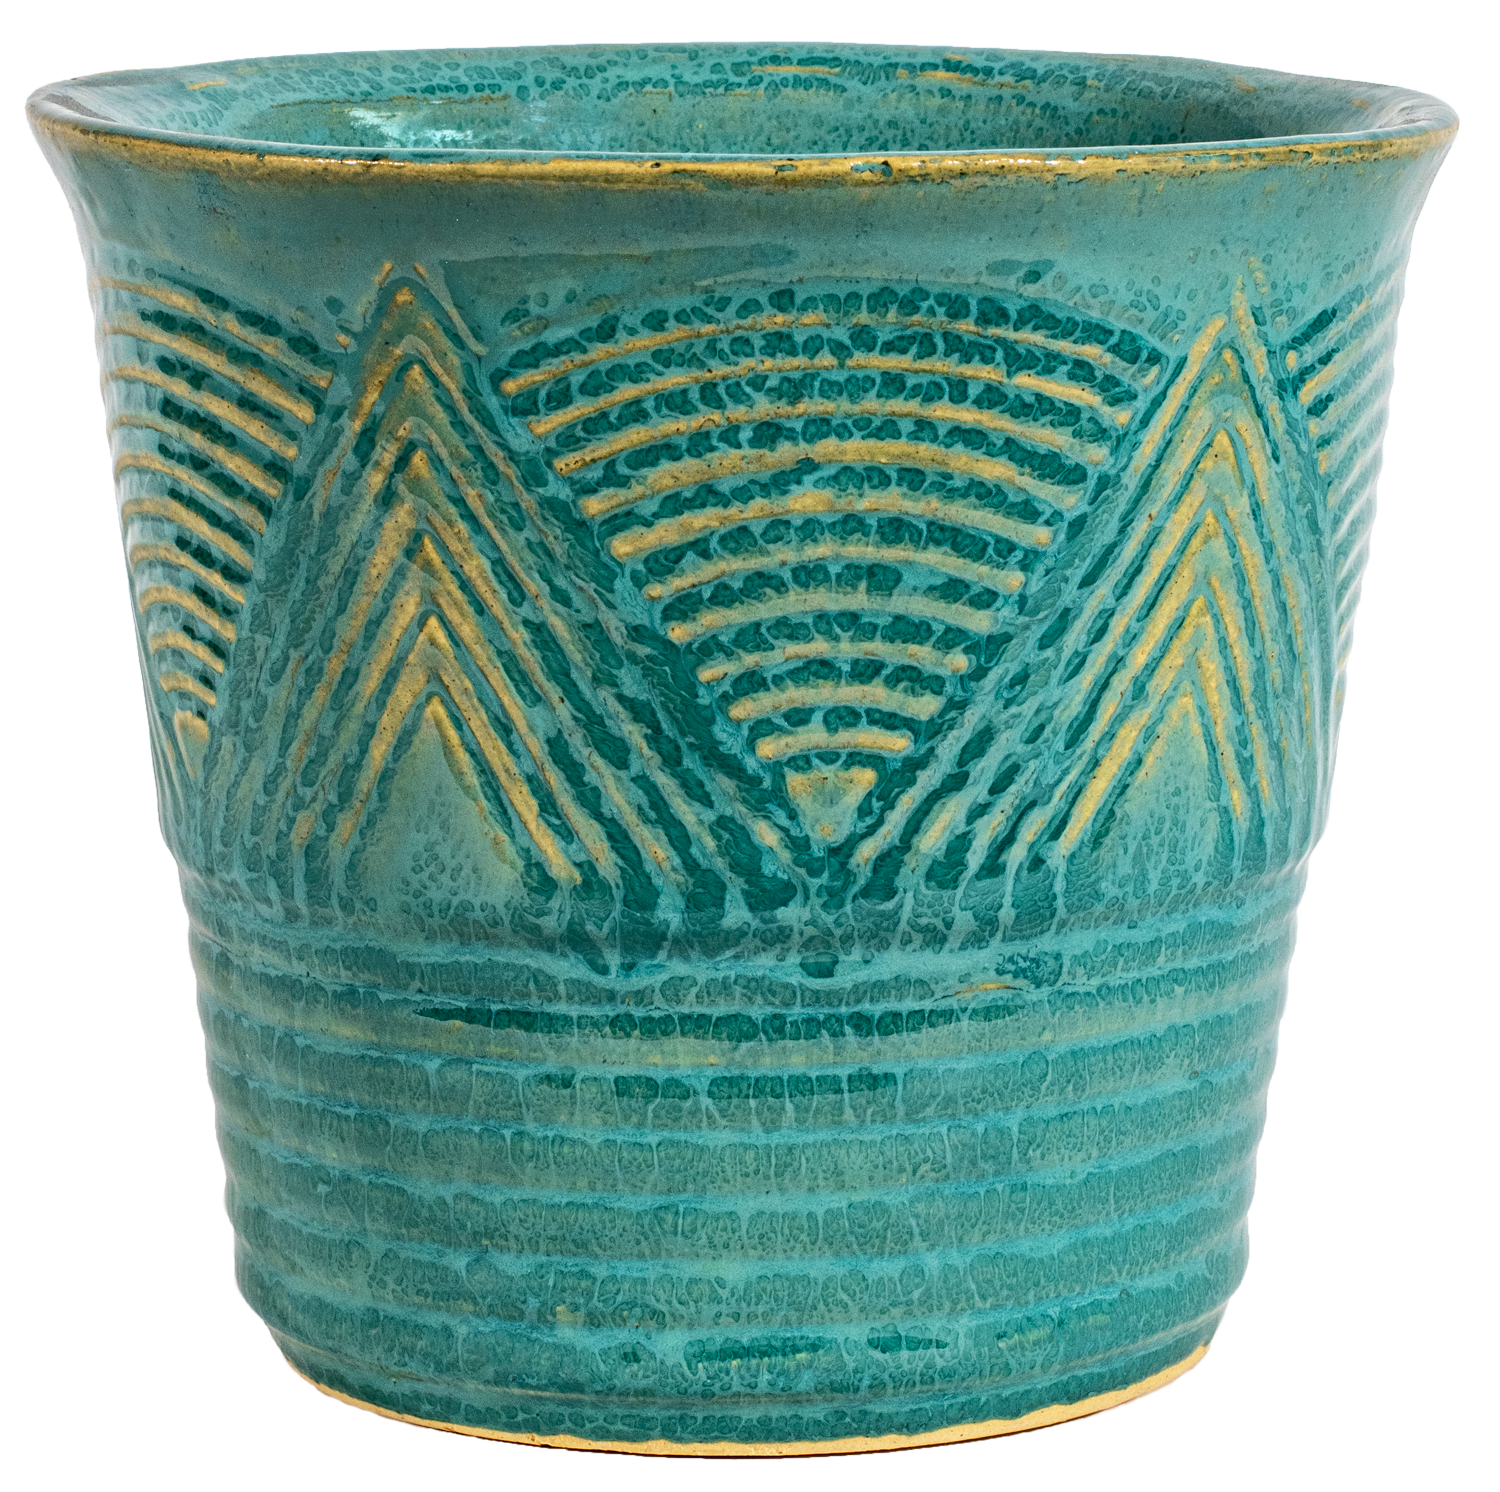 American Made indoor ceramic planter. Art deco style design in a turquoise glaze color